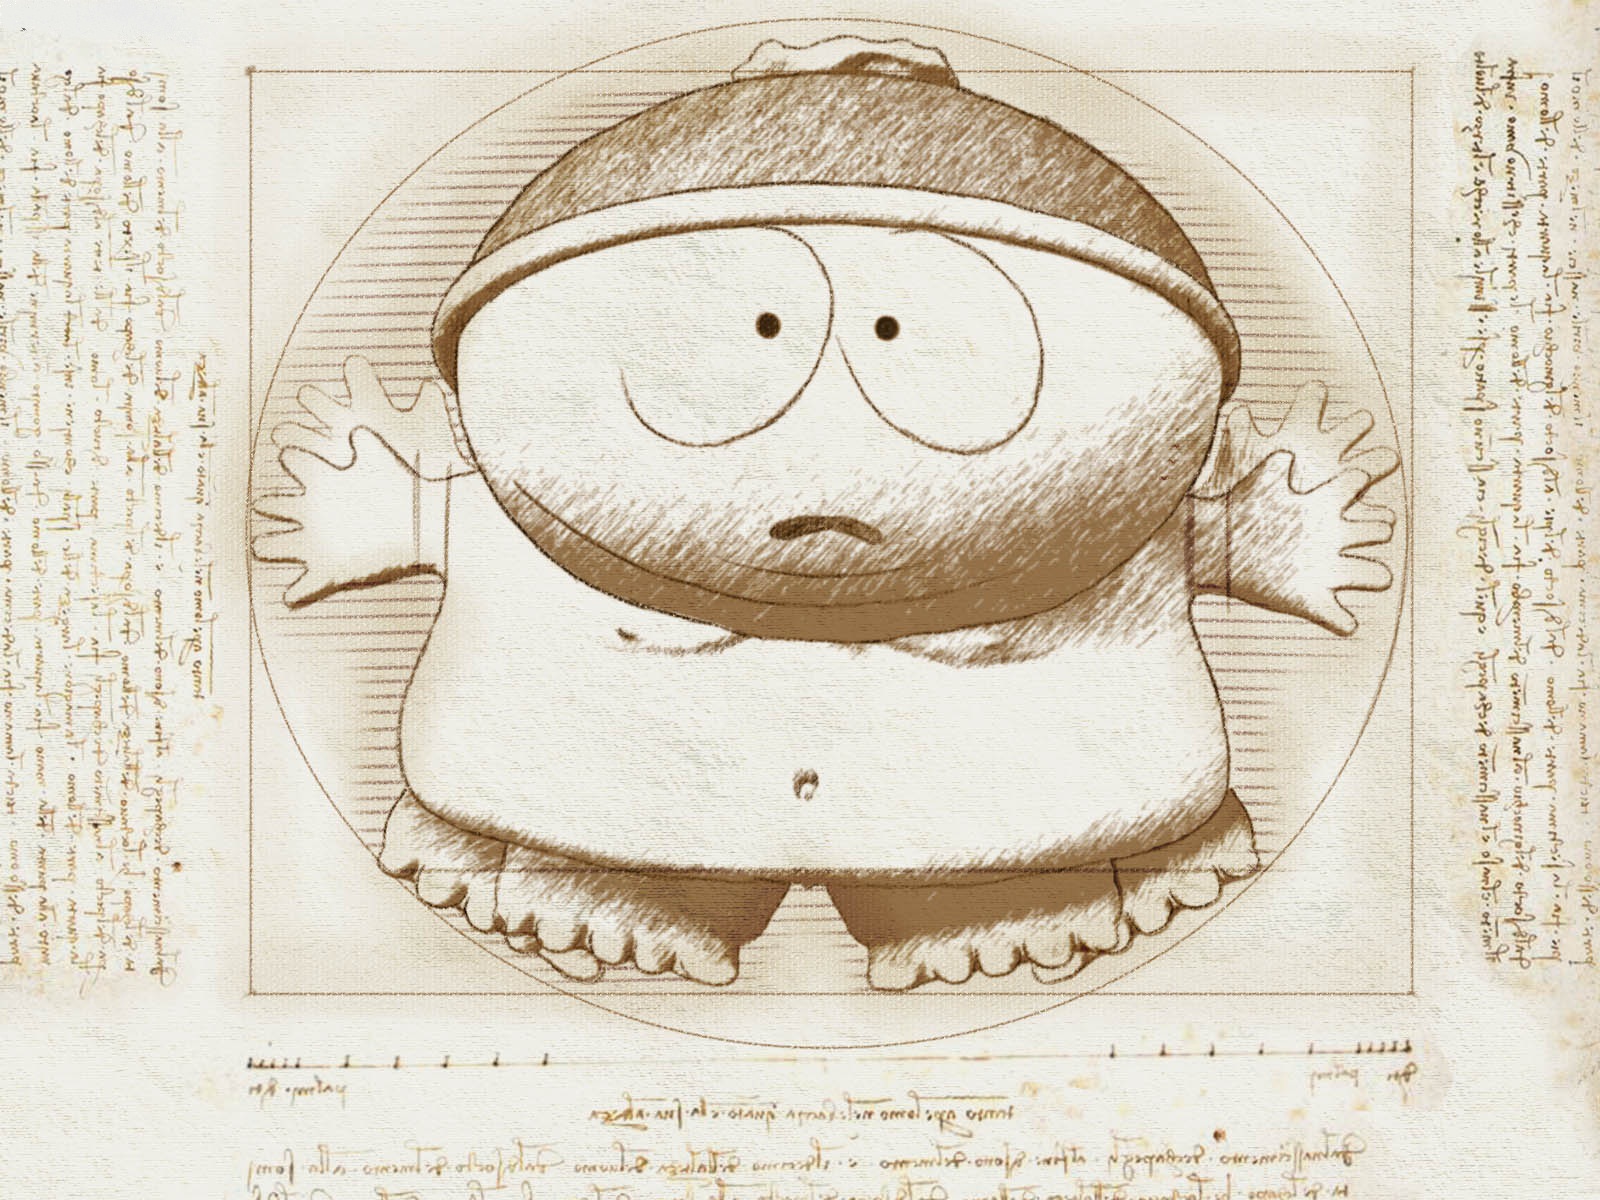 Cartman depicted as Leonardo da Vinci's artwork, with attention to detail and clever fusion.